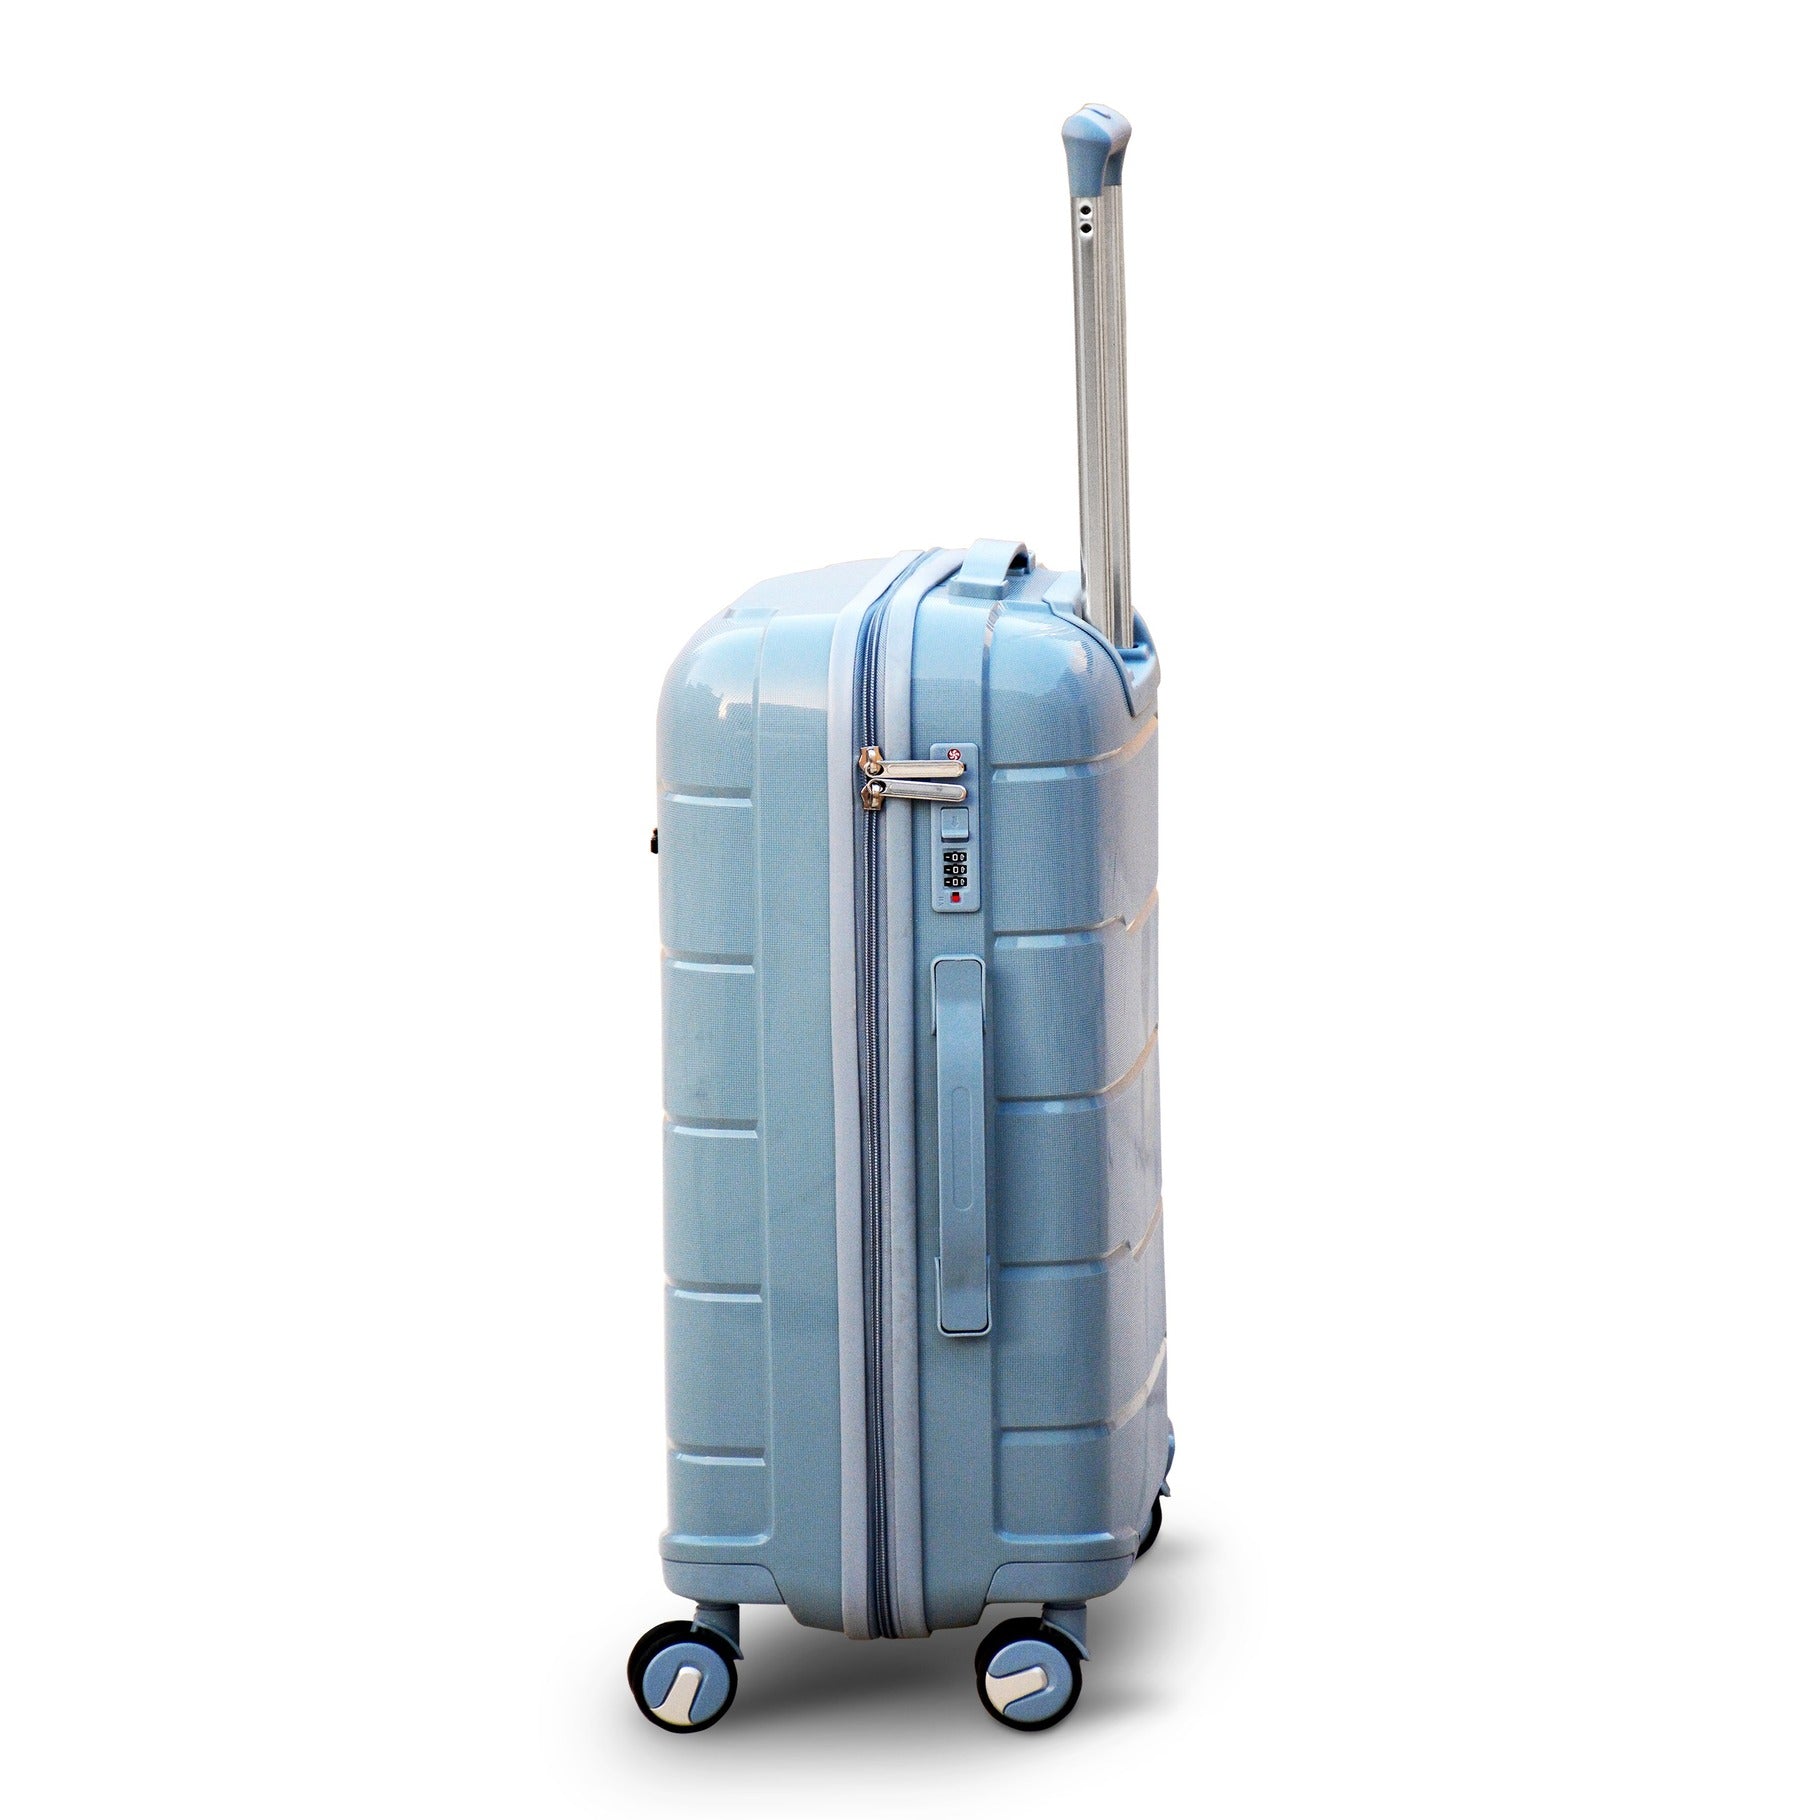 28" Grey Colour Non Expandable Ceramic PP Luggage Lightweight Hard Case Trolley Bag with Double Spinner Wheel